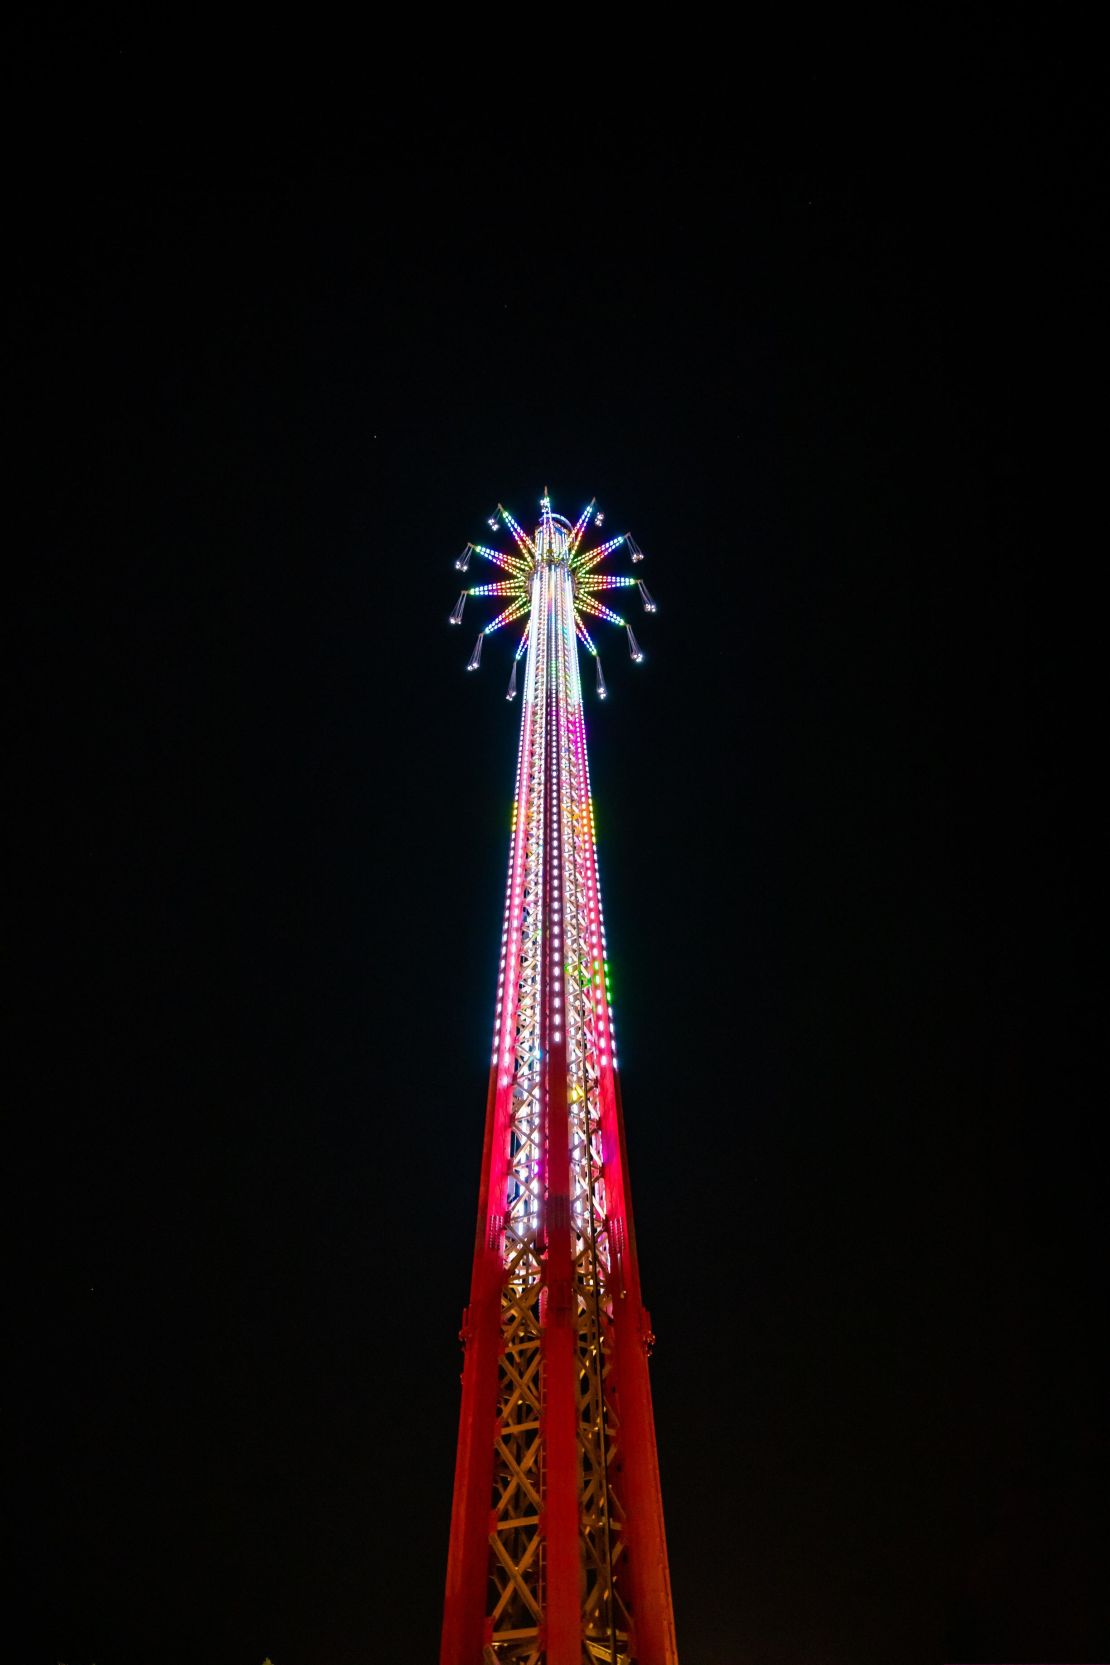 At 460 feet, the Bollywood Skyflyer is now the world's tallest swing ride